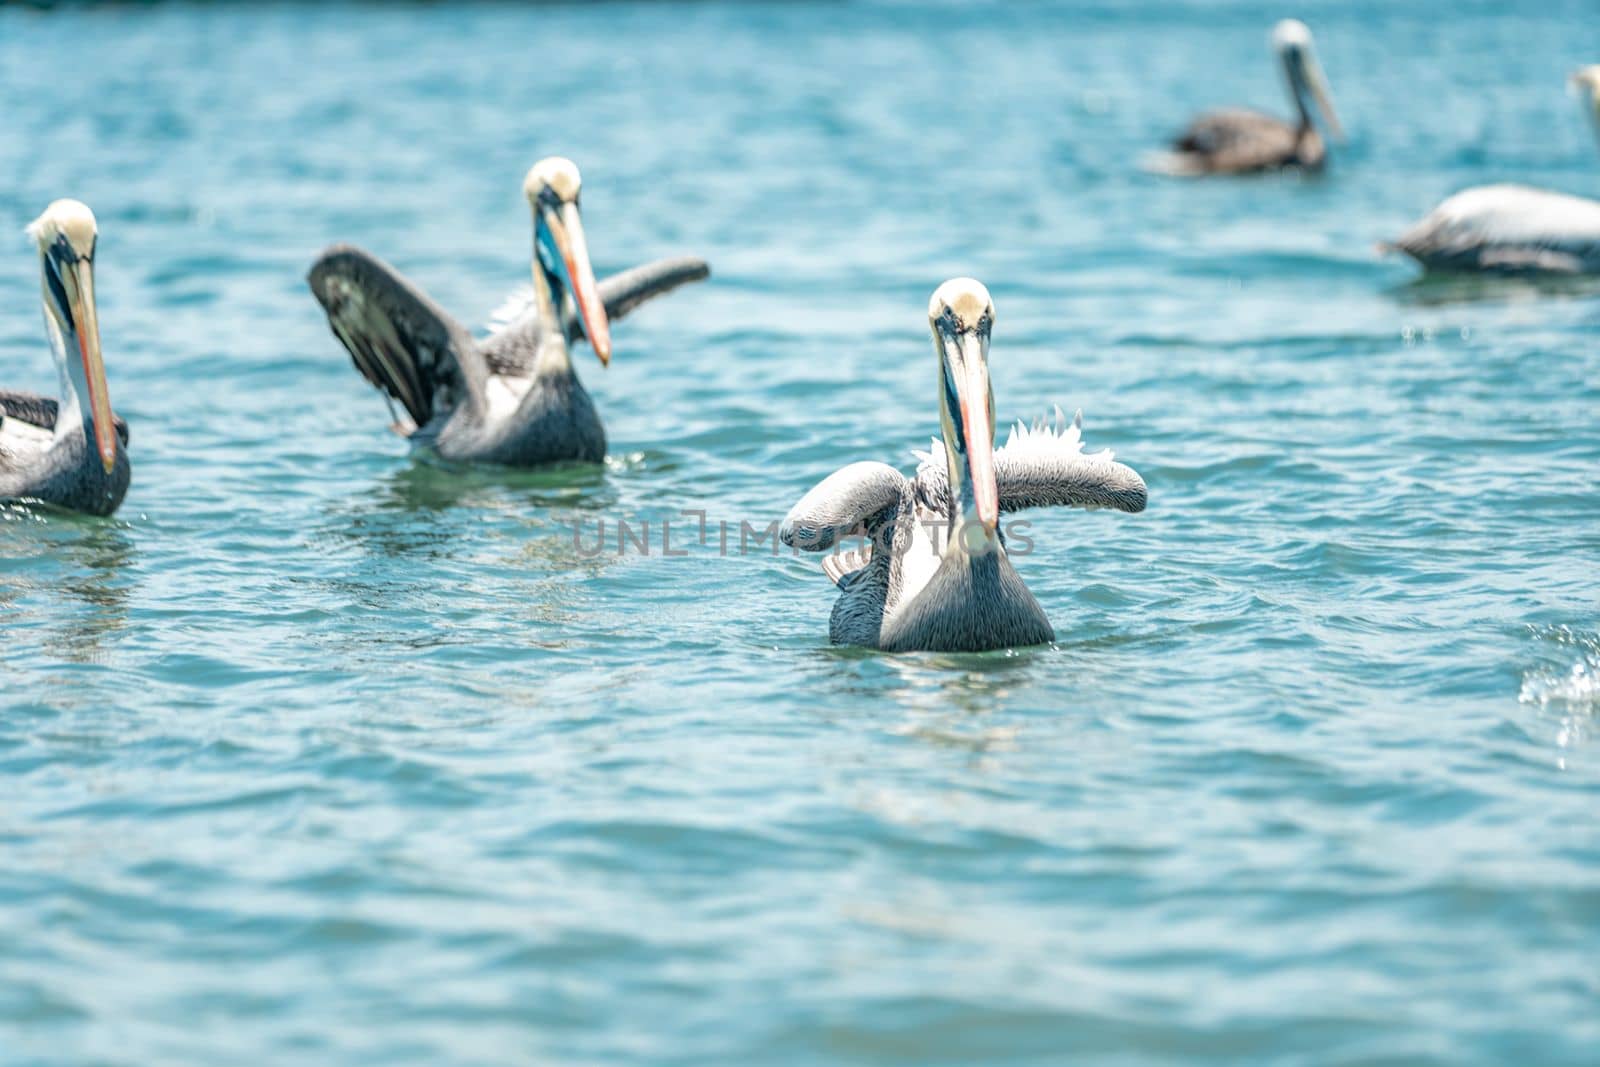 pelicans on the water surface of the ocean.